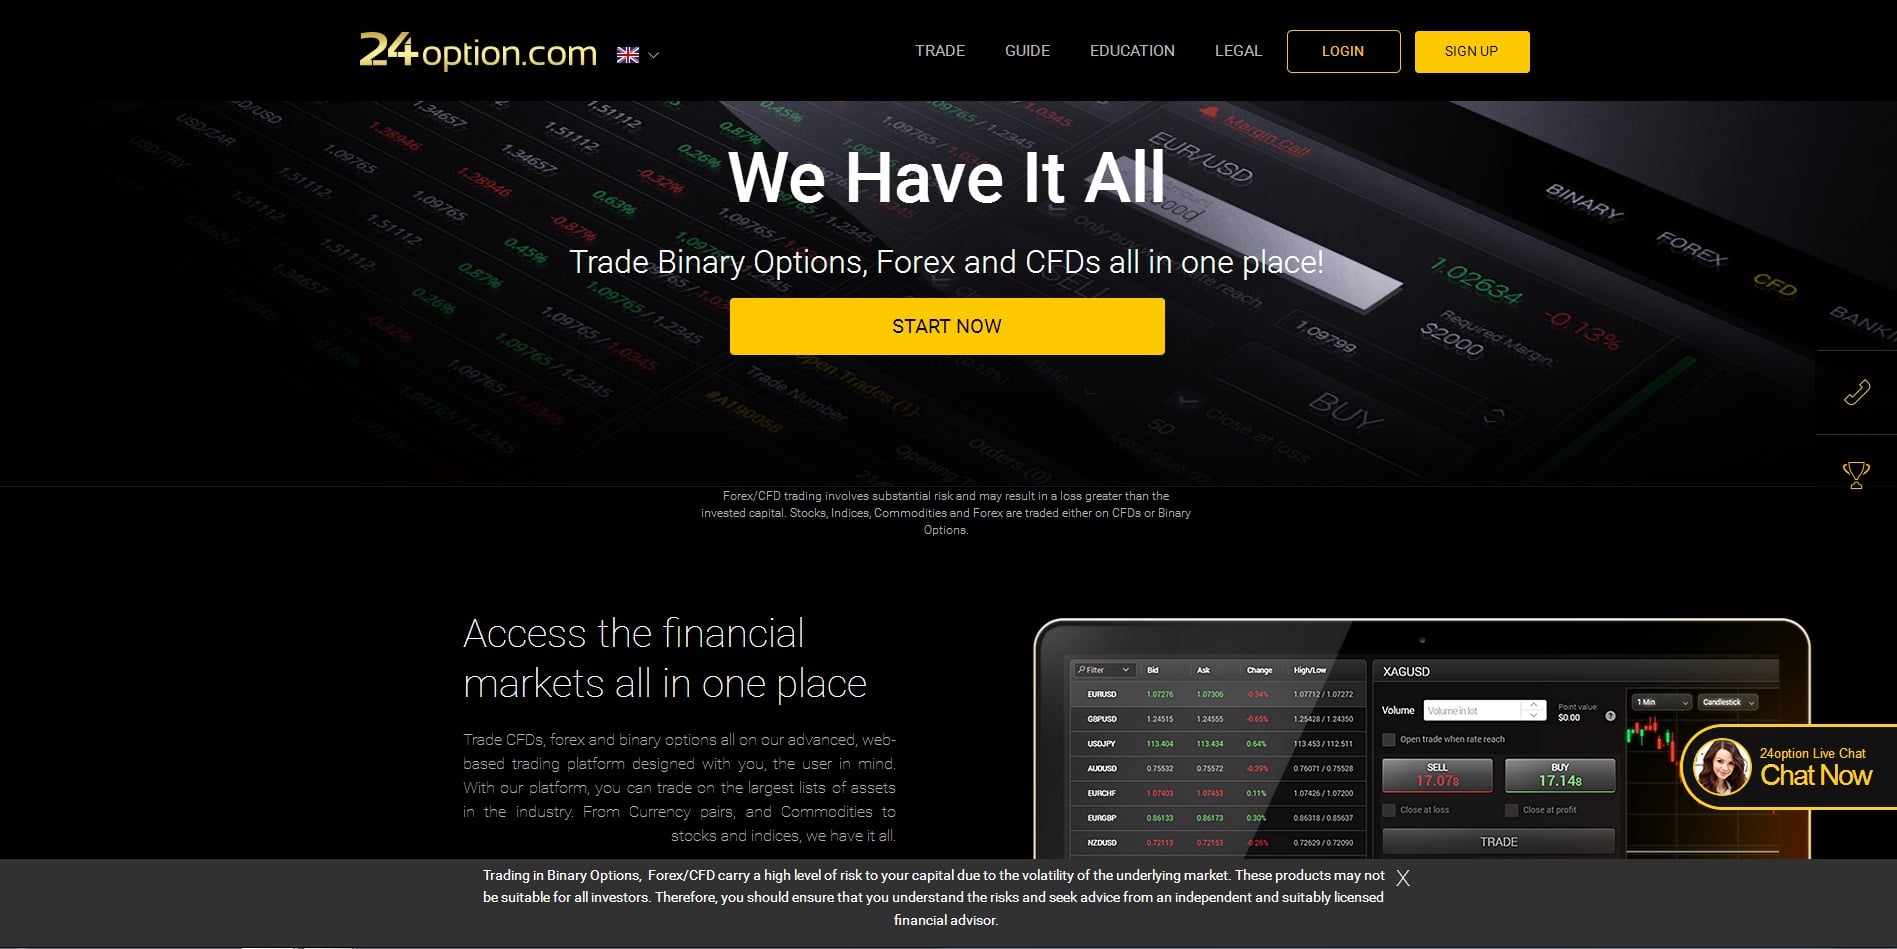 Can us clients trade binary options with race option